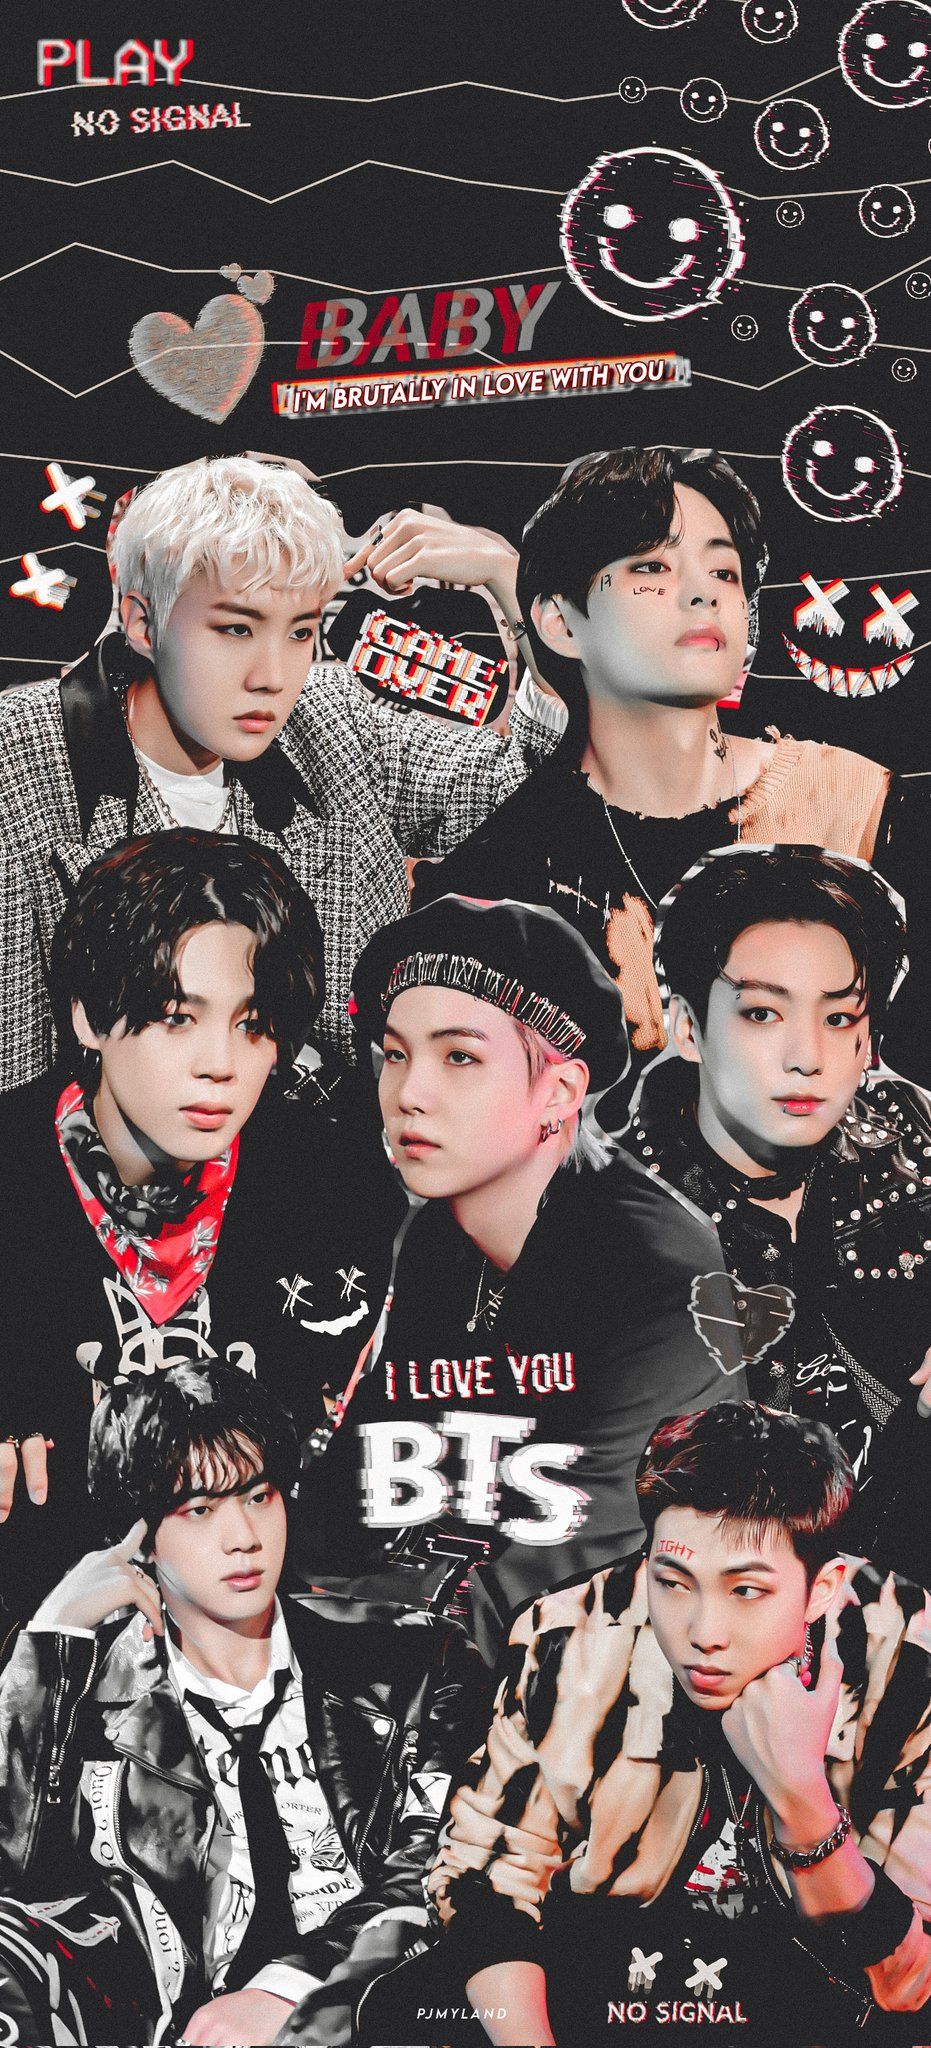 BTS WALLPAPERS! (Request in comments) - BTS